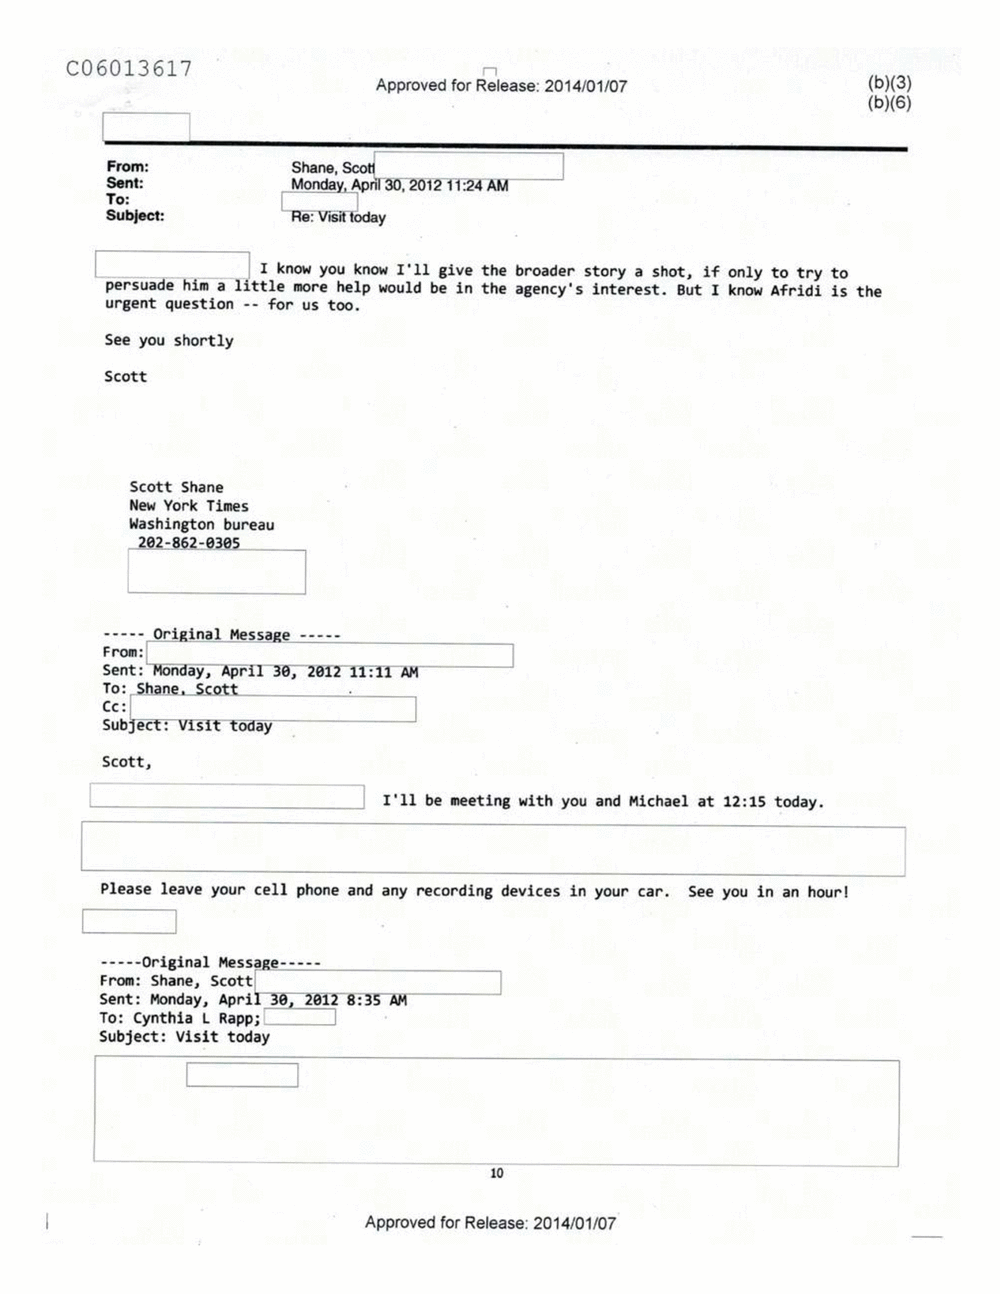 Page 446 from Email Correspondence Between Reporters and CIA Flacks